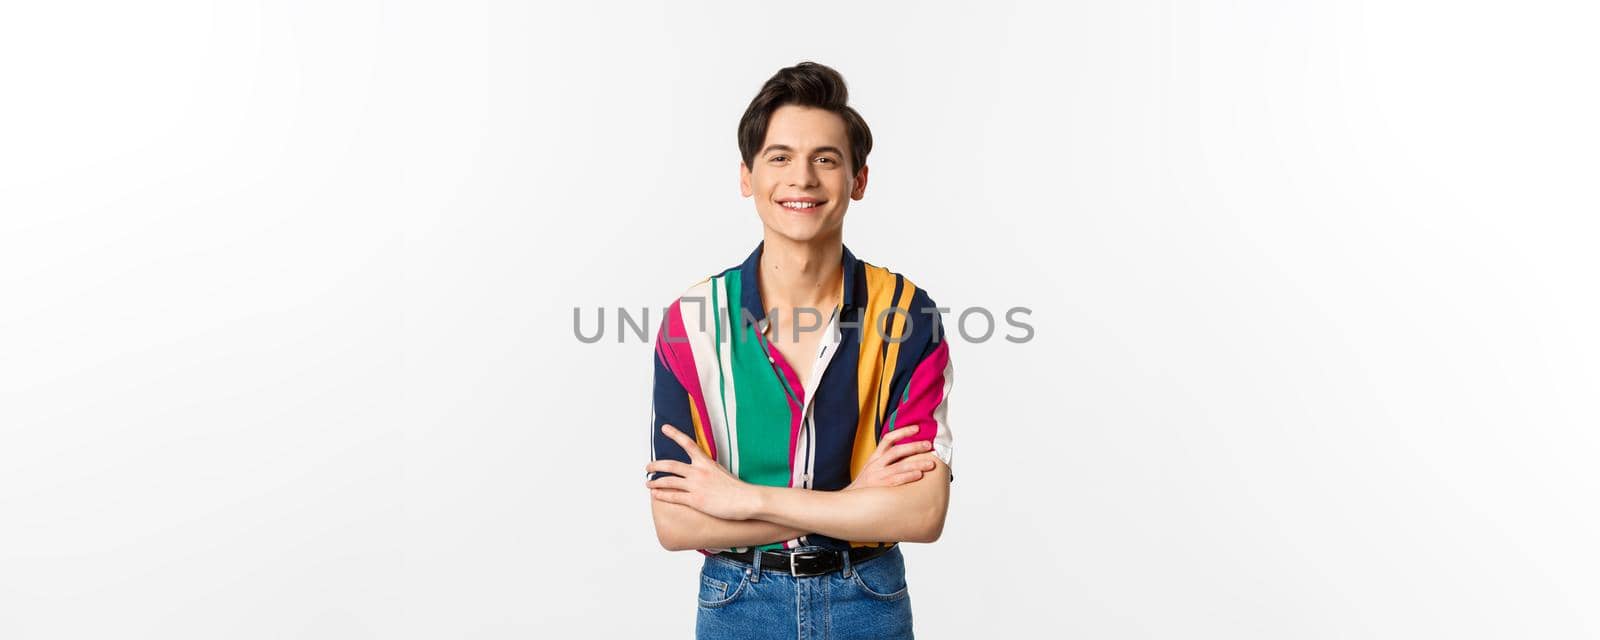 Hansome smiling gay man looking happy, standing over white background in summer outfit.